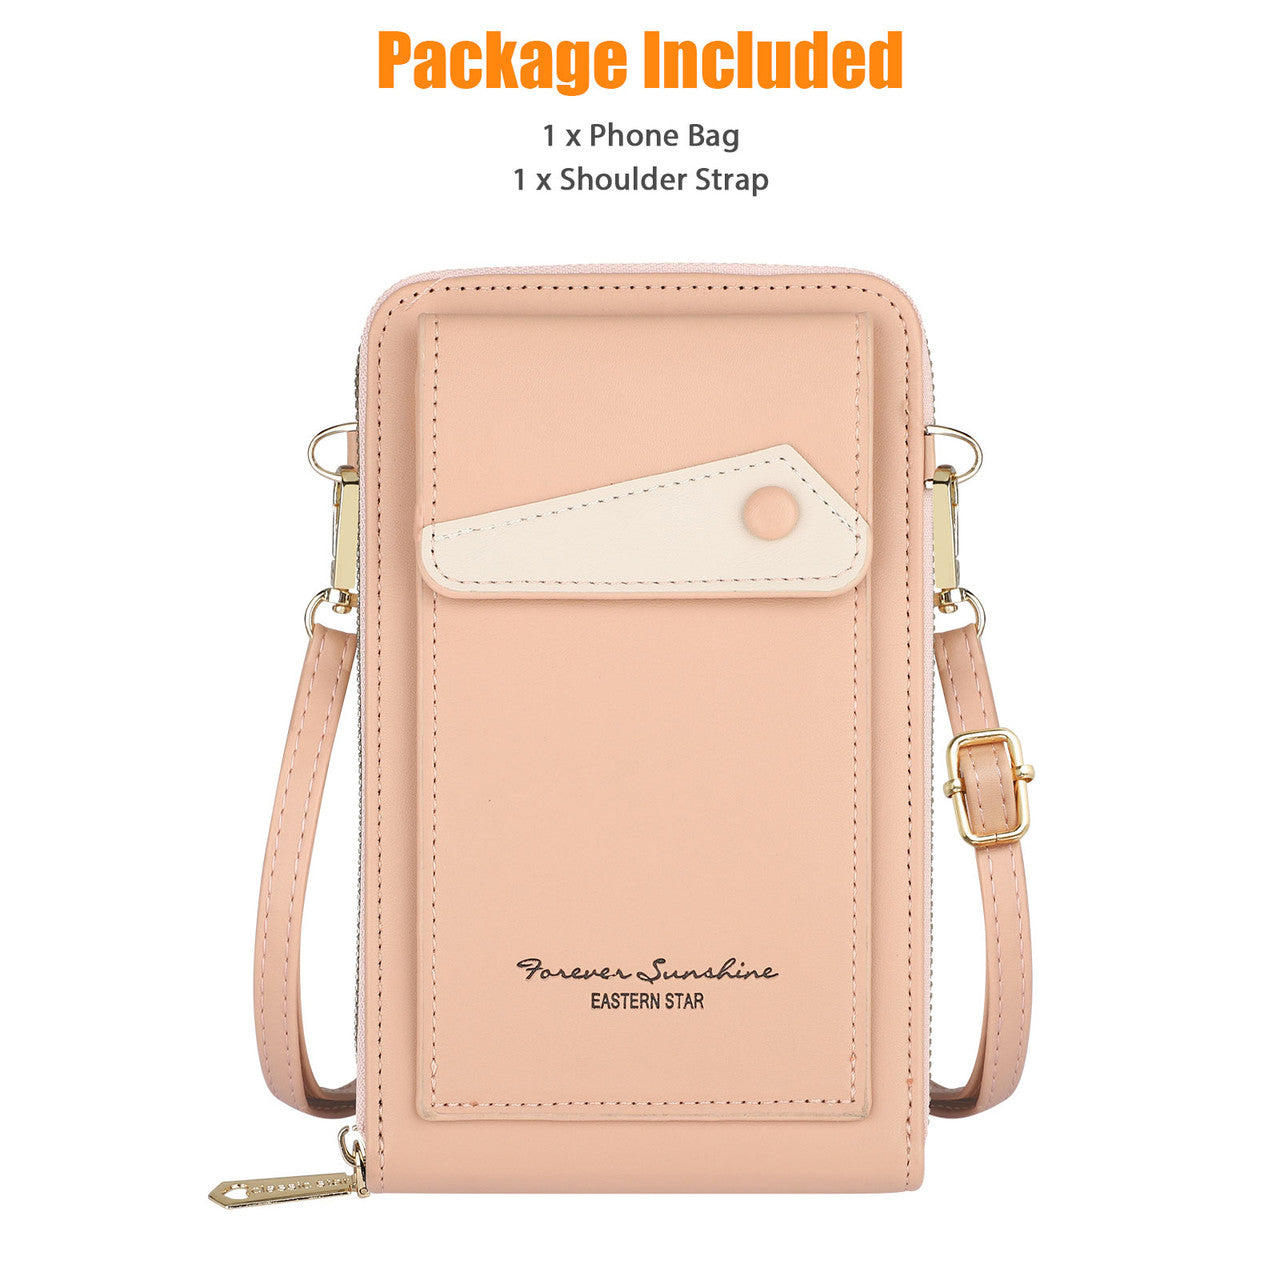 Small Crossbody Cell Phone Purse for Women-Mobile Phone Wallet Lanyard Handbag with Shoulder Wrist Strap, Waterproof Phone